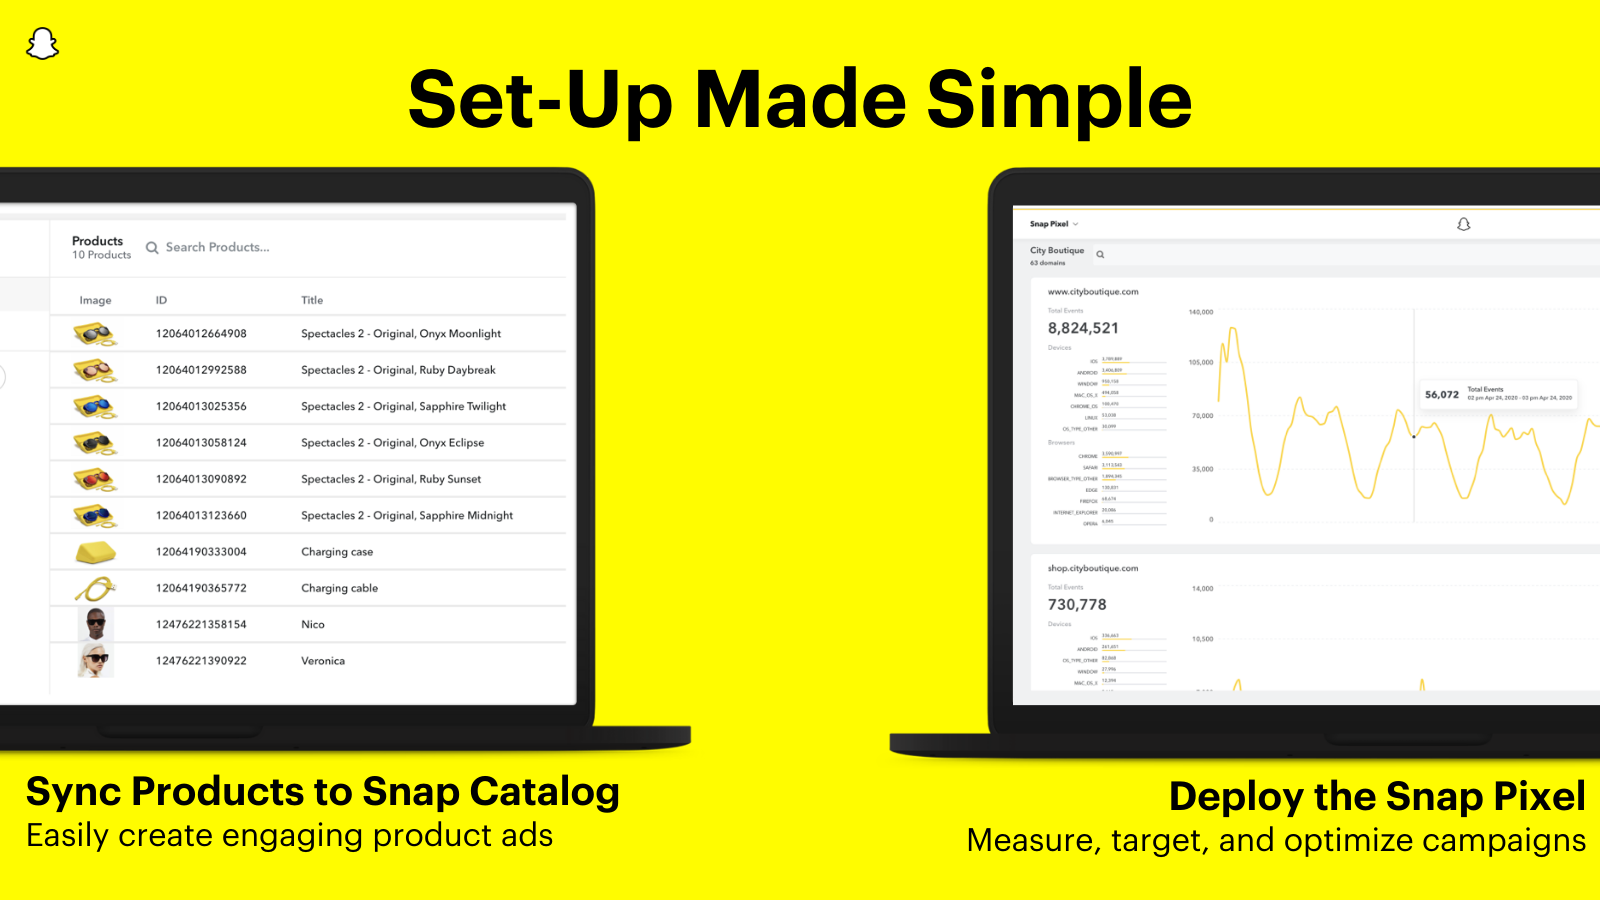 Deploy Snap Pixel and sync products to Snap Catalog